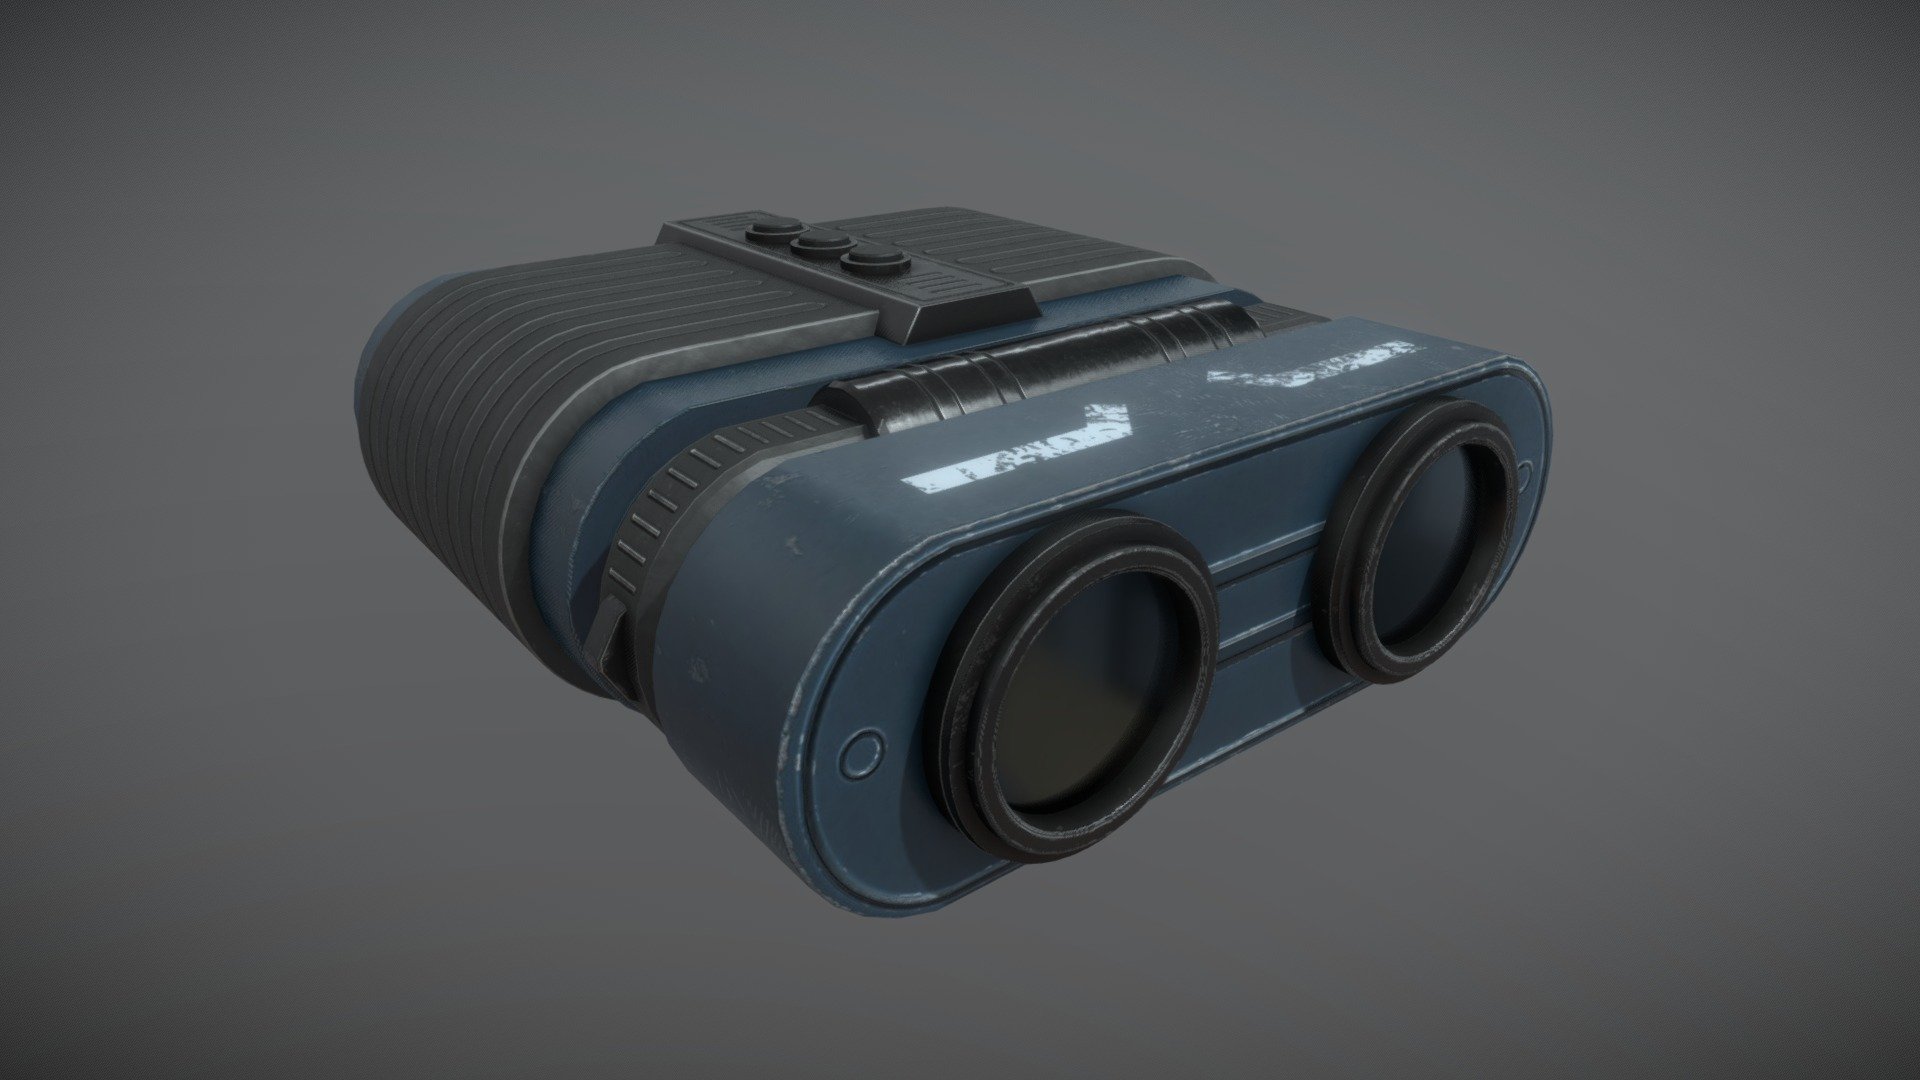 Sci Fi binoculars Low Poly 3D model

Includes PBR texture set: -Base Color -Metallic -Normal- Roughness

File Formats: -Obj -FBX

Hope you like it, Be sure to check out my other 3D models if you get a chance - Sci Fi Binoculars - Buy Royalty Free 3D model by captainapoc 3d model